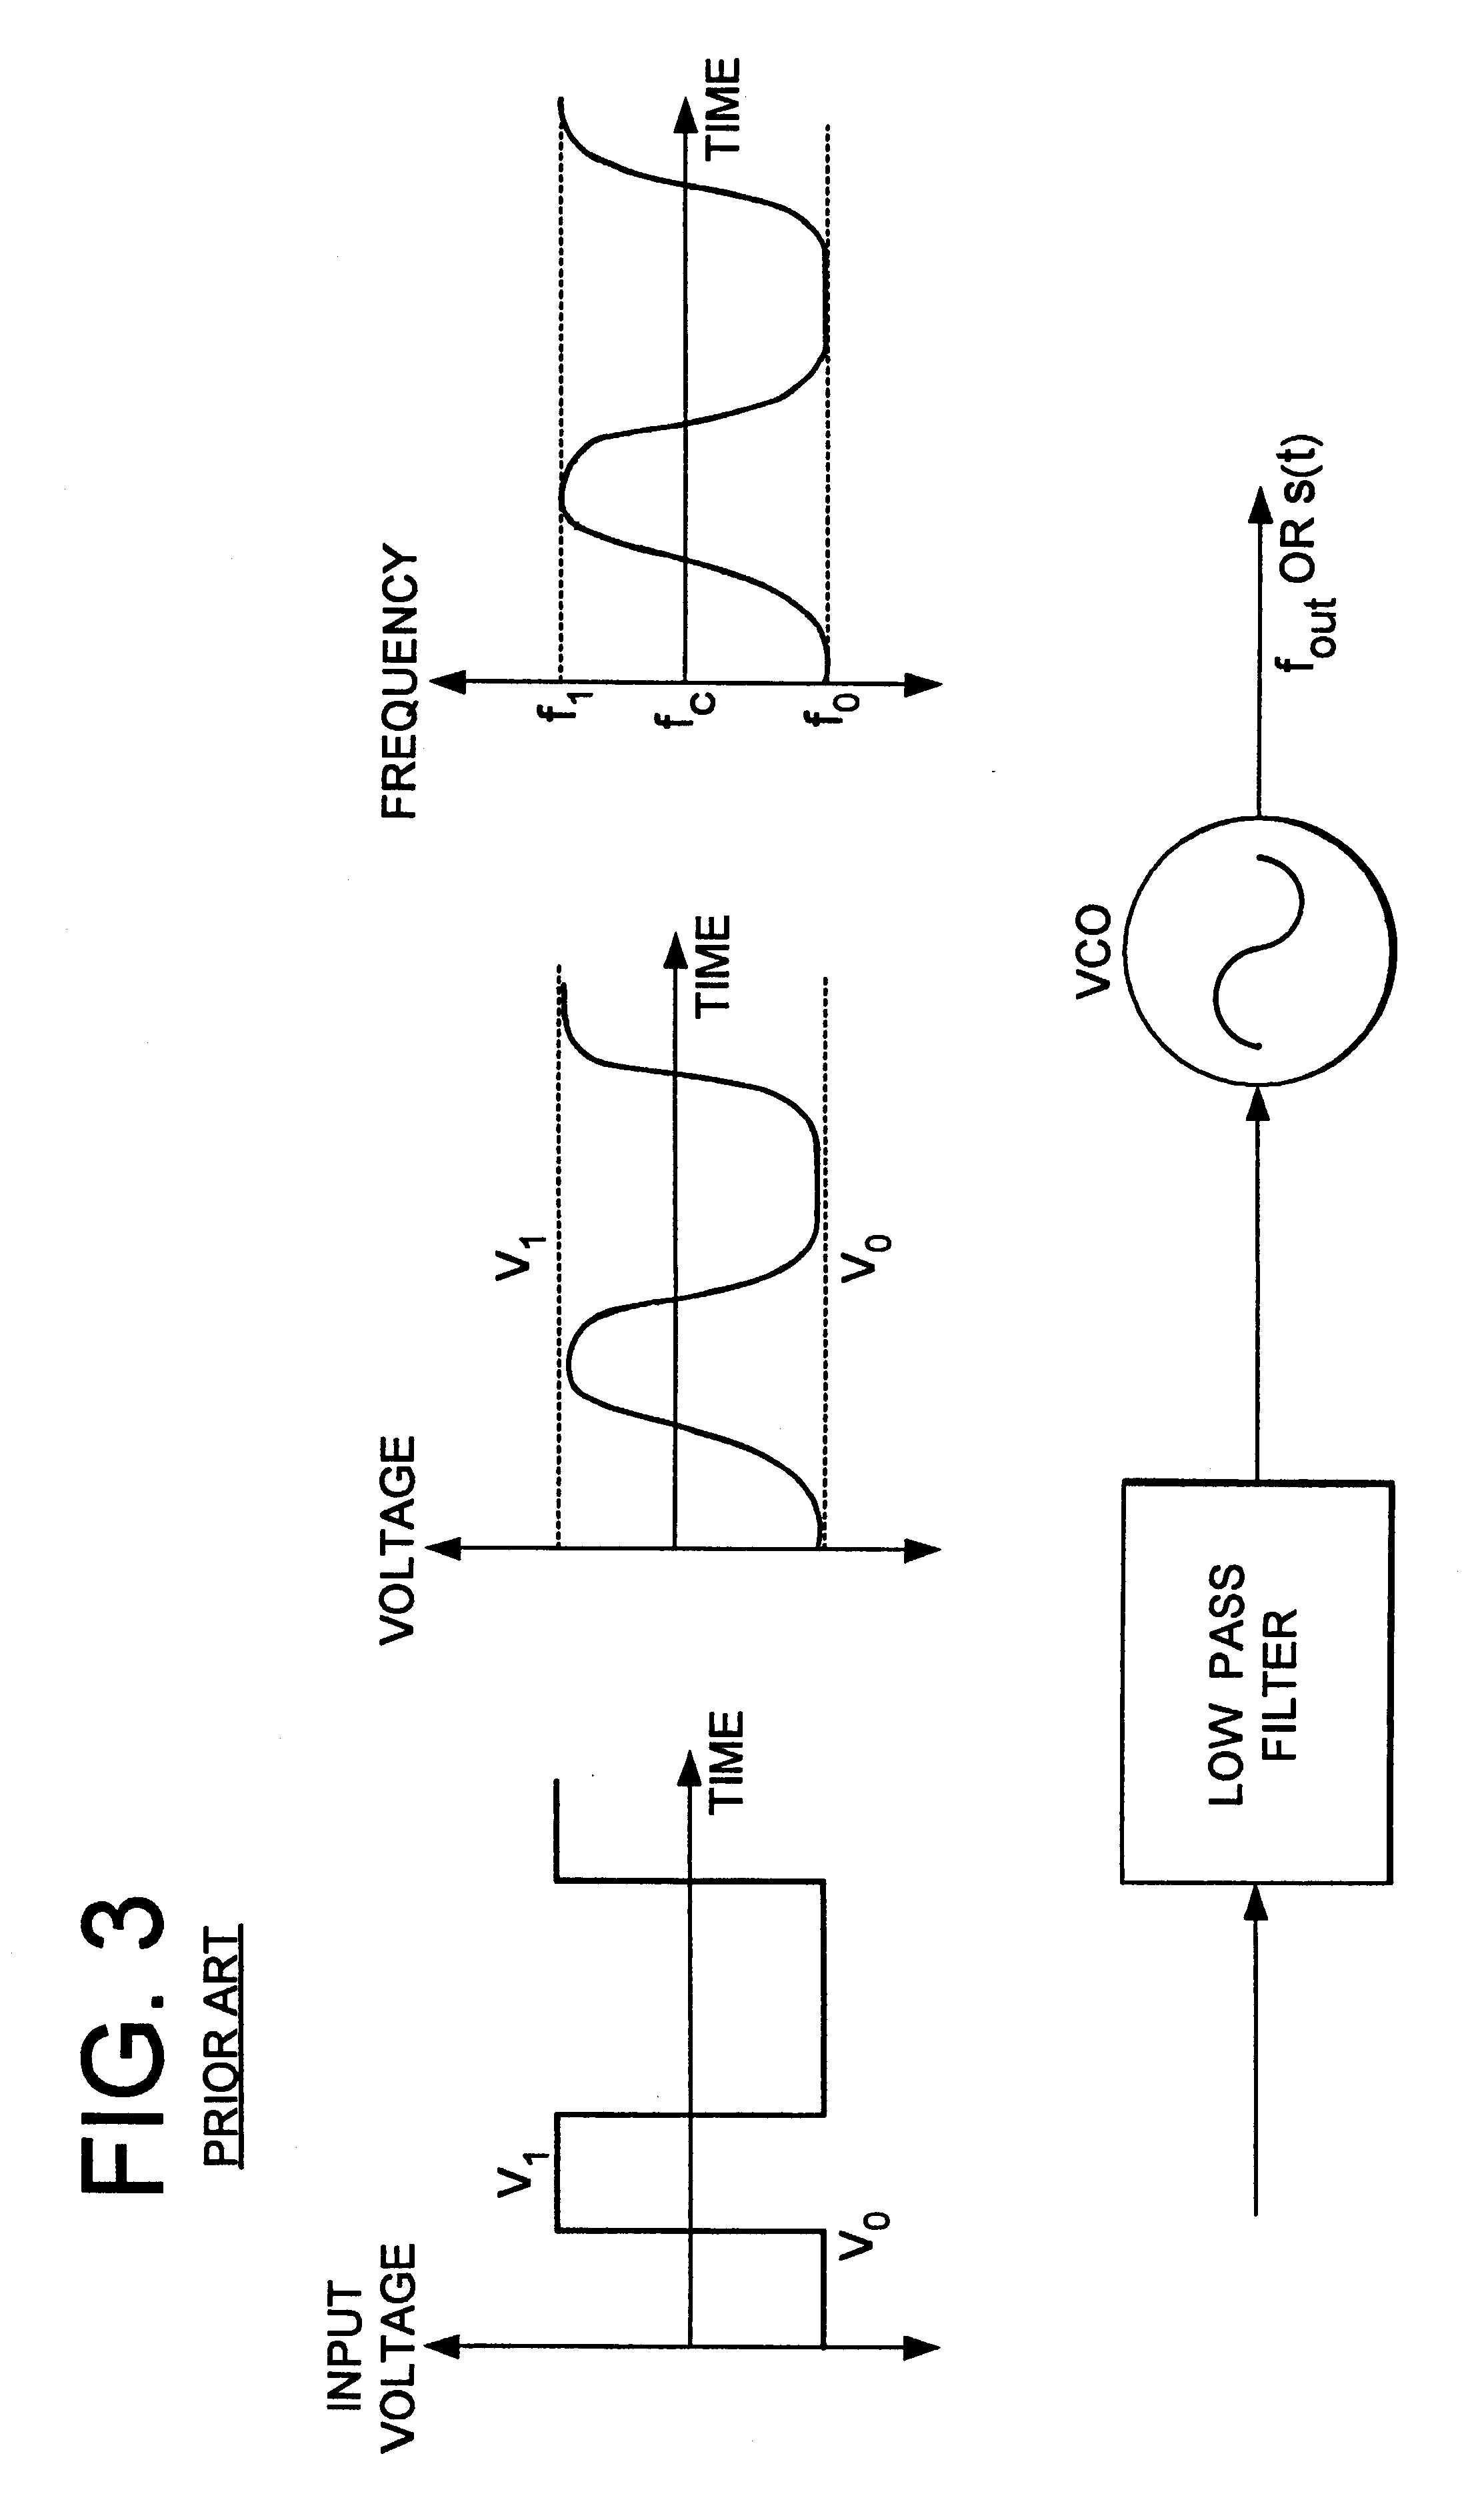 Dynamic adjustment to preserve signal-to-noise ratio in a quadrature detector system